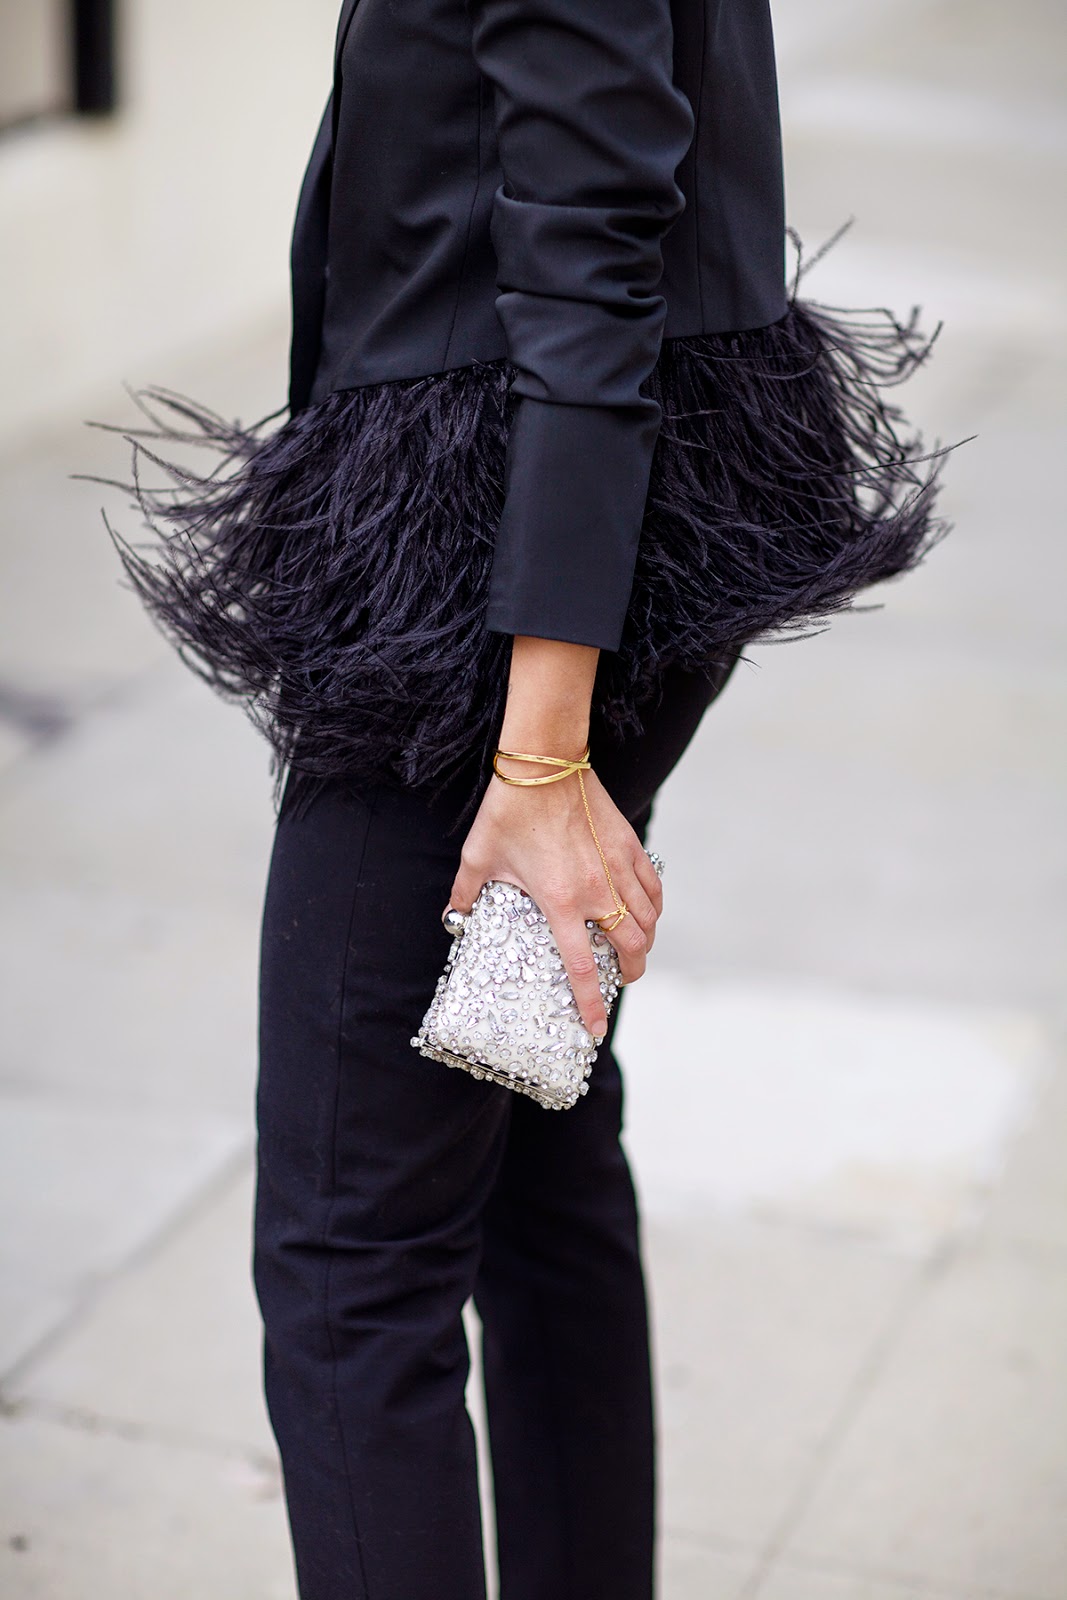 How To Wear Feathers (Without Looking Like A Bird) – Closetful of Clothes